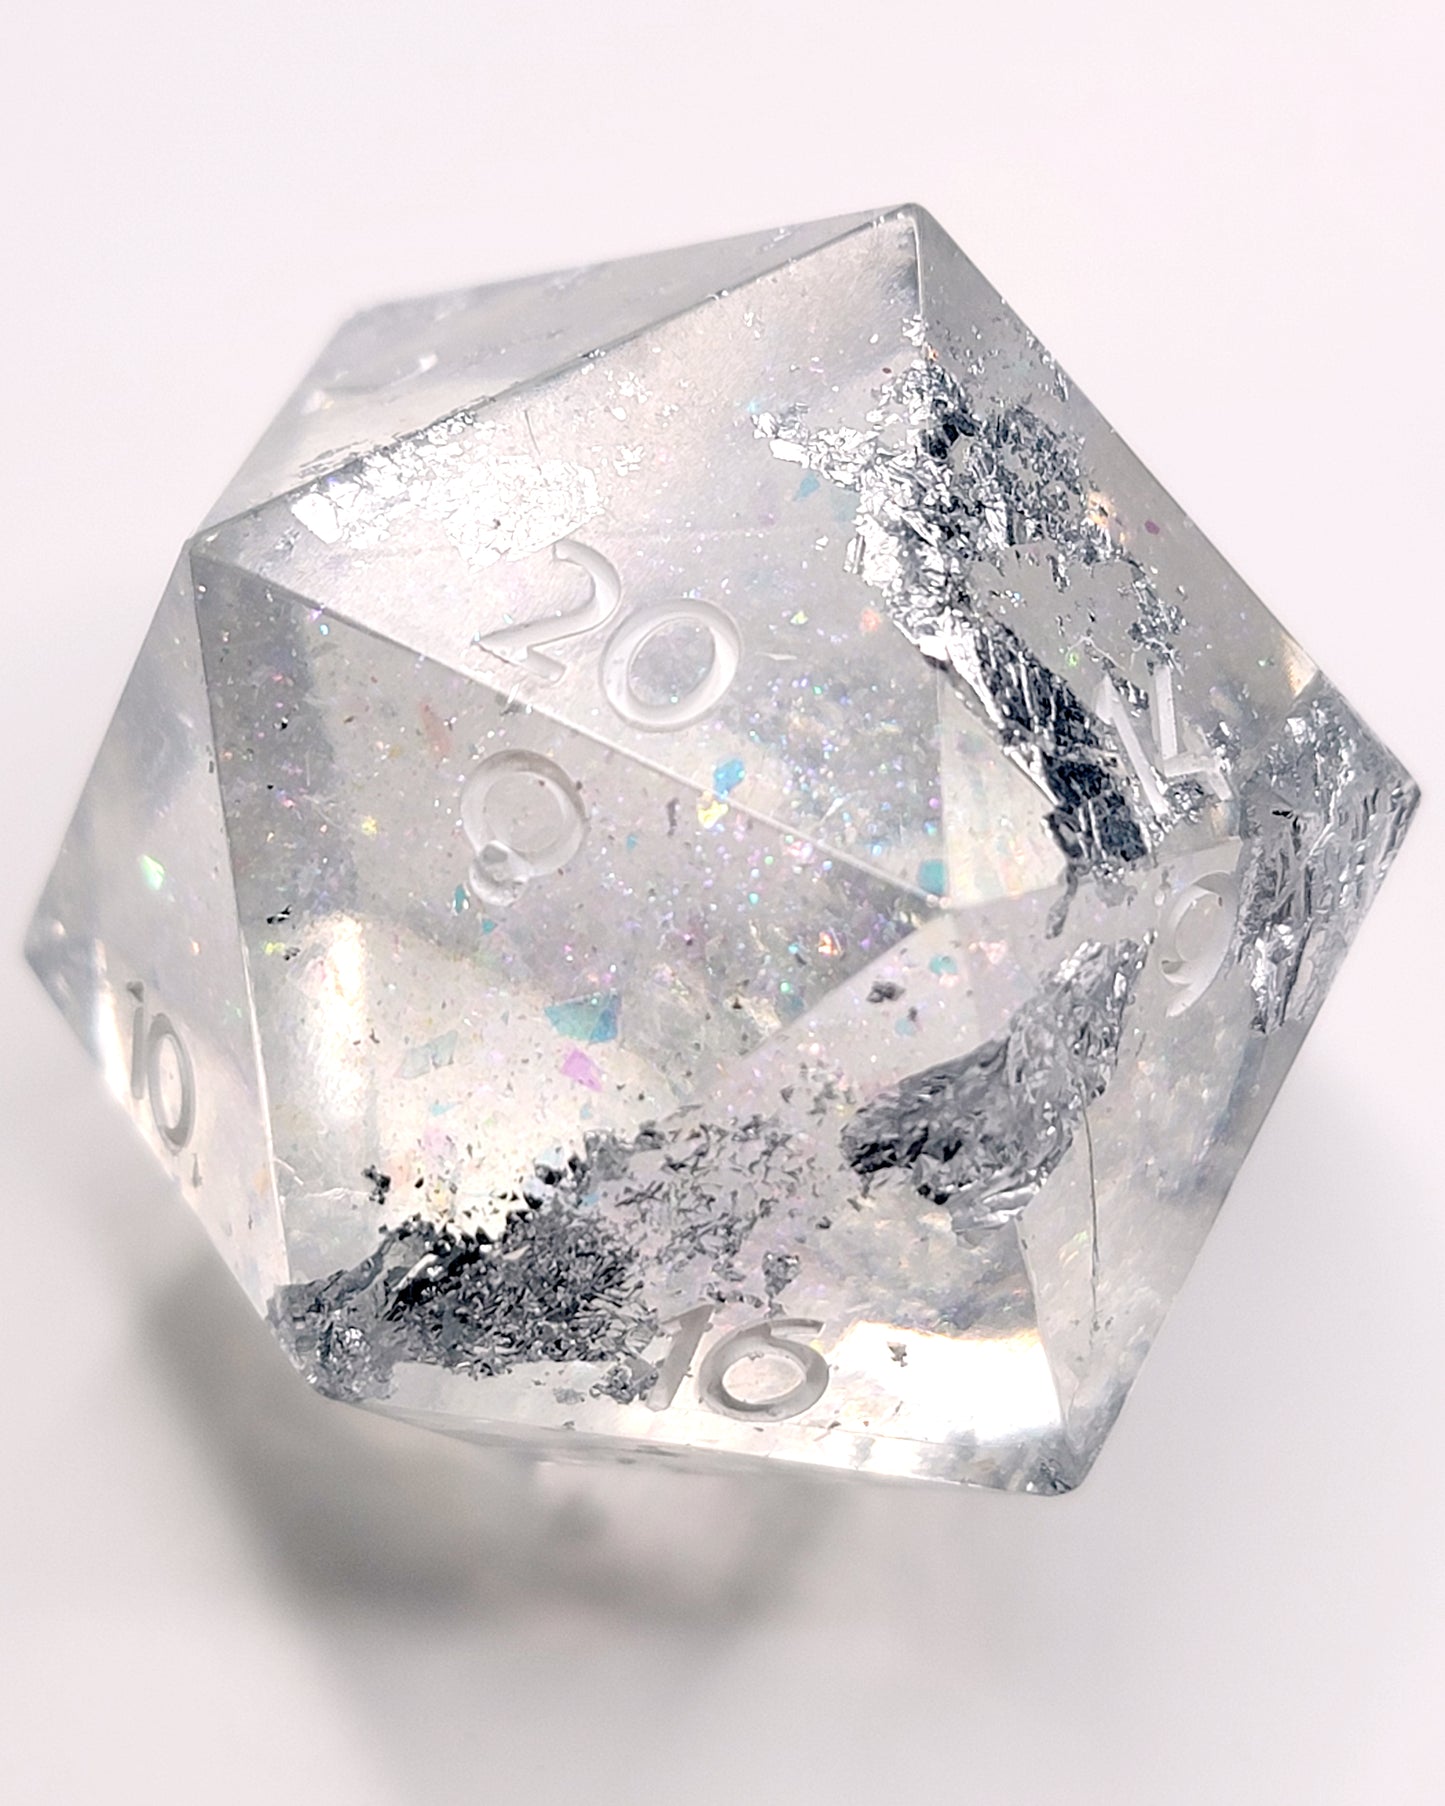 Crystal Soul 40mm Chonk -1 D20 | Handmade Dice | Hand Crafted Dungeons and Dragons Dice